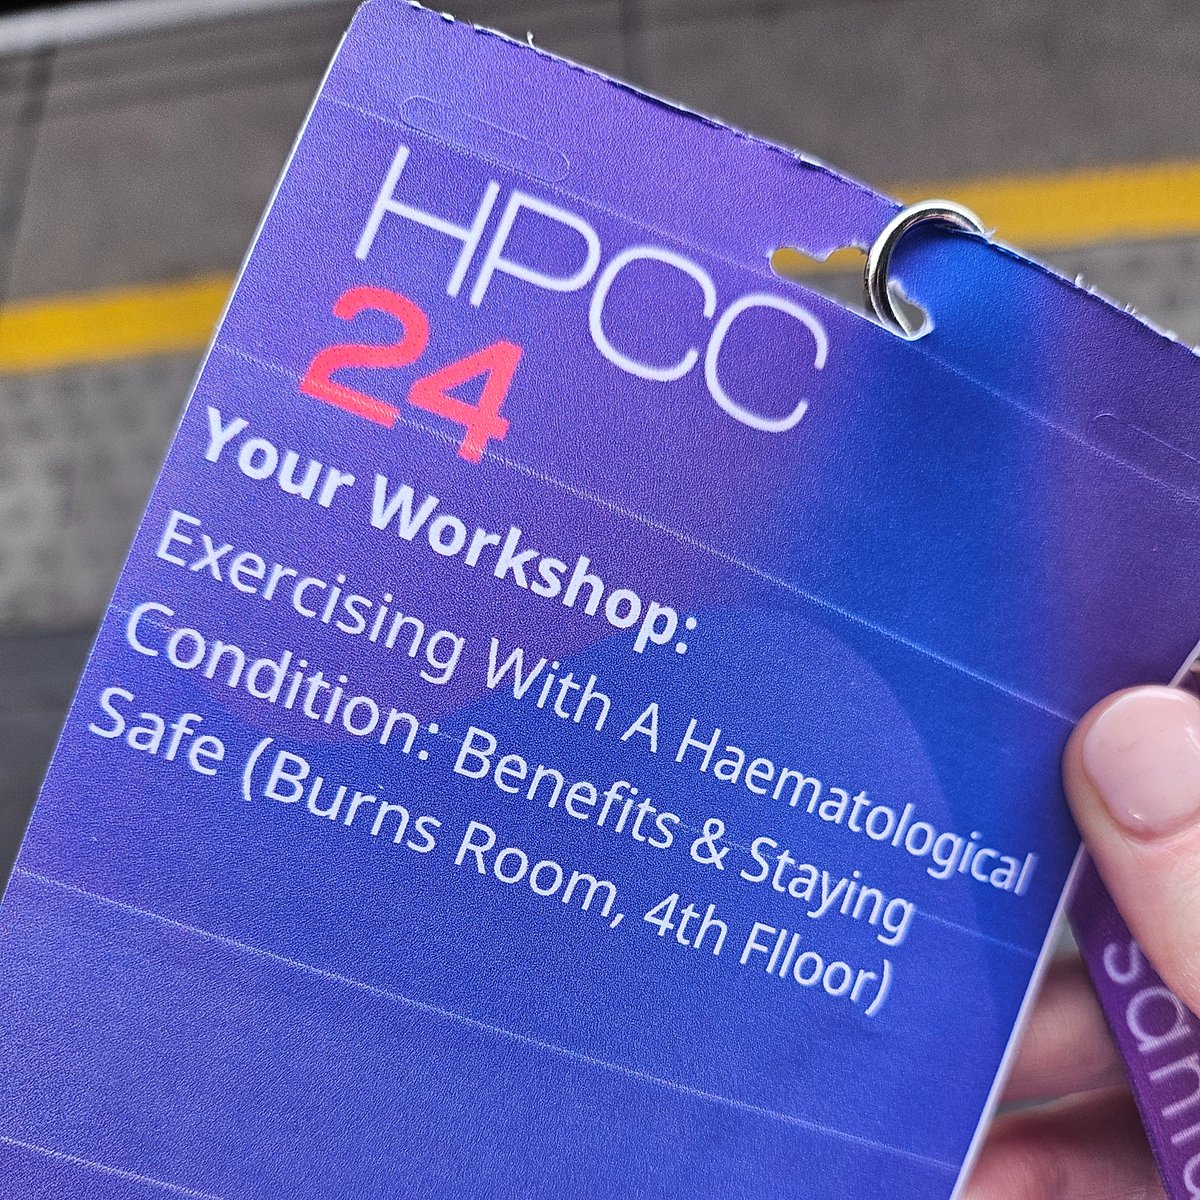 Such great feedback from #HPCC2024 attendees on importance of #physicalactivity and how to overcome barriers when living with a #haematology condition.

Professional double act with @physio_paul, drawing on experience supporting people with #myeloma and #haemophilia